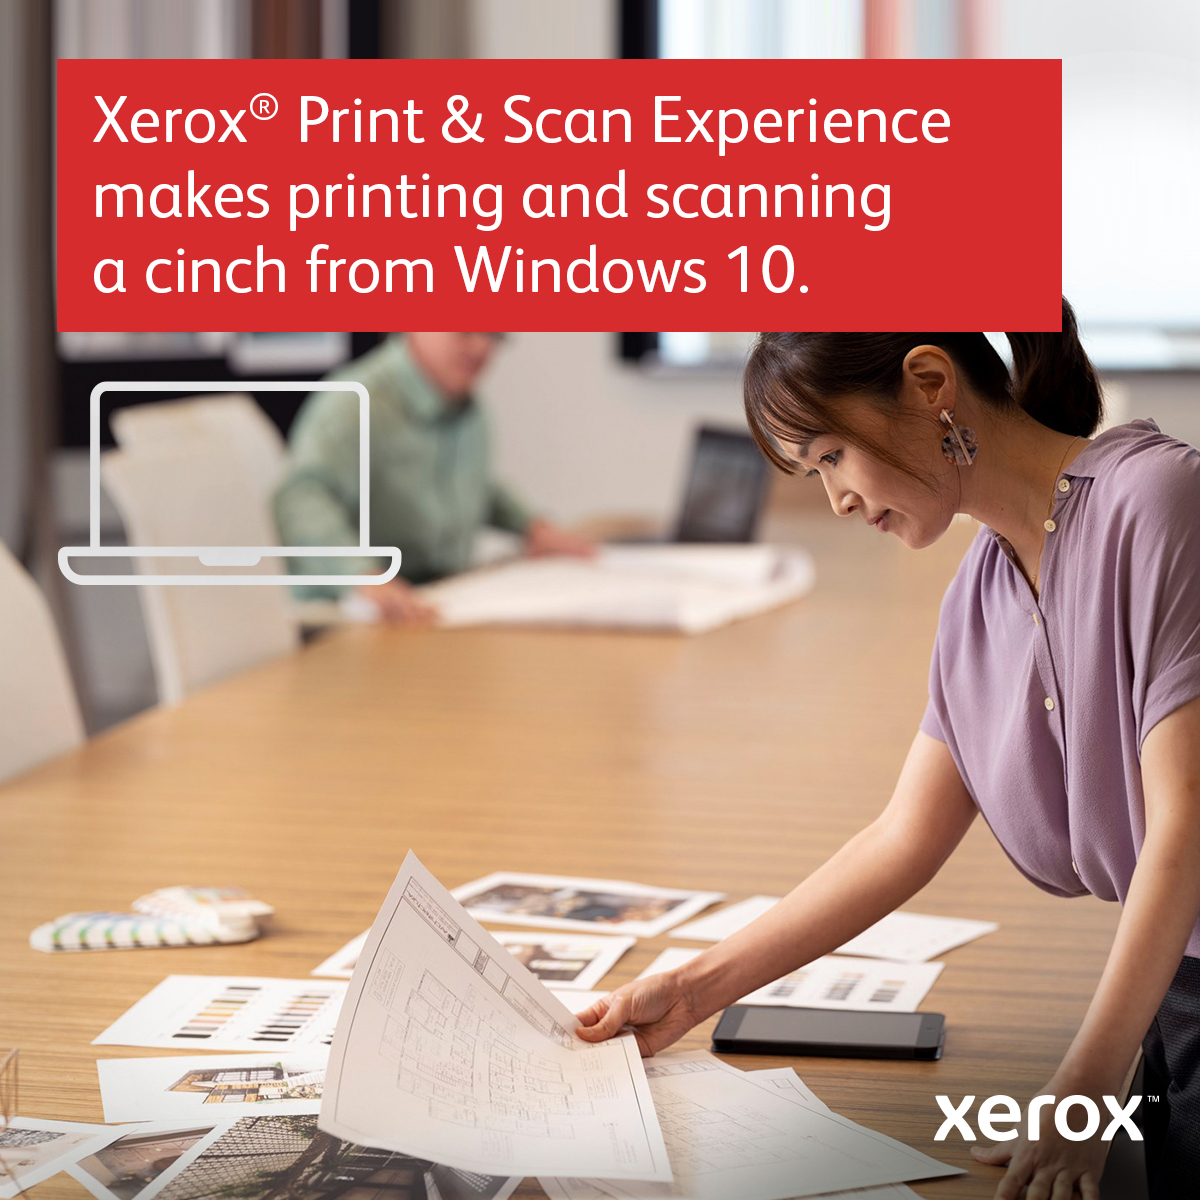 Xerox B235 Multifunction Printer, Print/Scan/Copy/Fax, Black and White Laser, Wireless, All In One